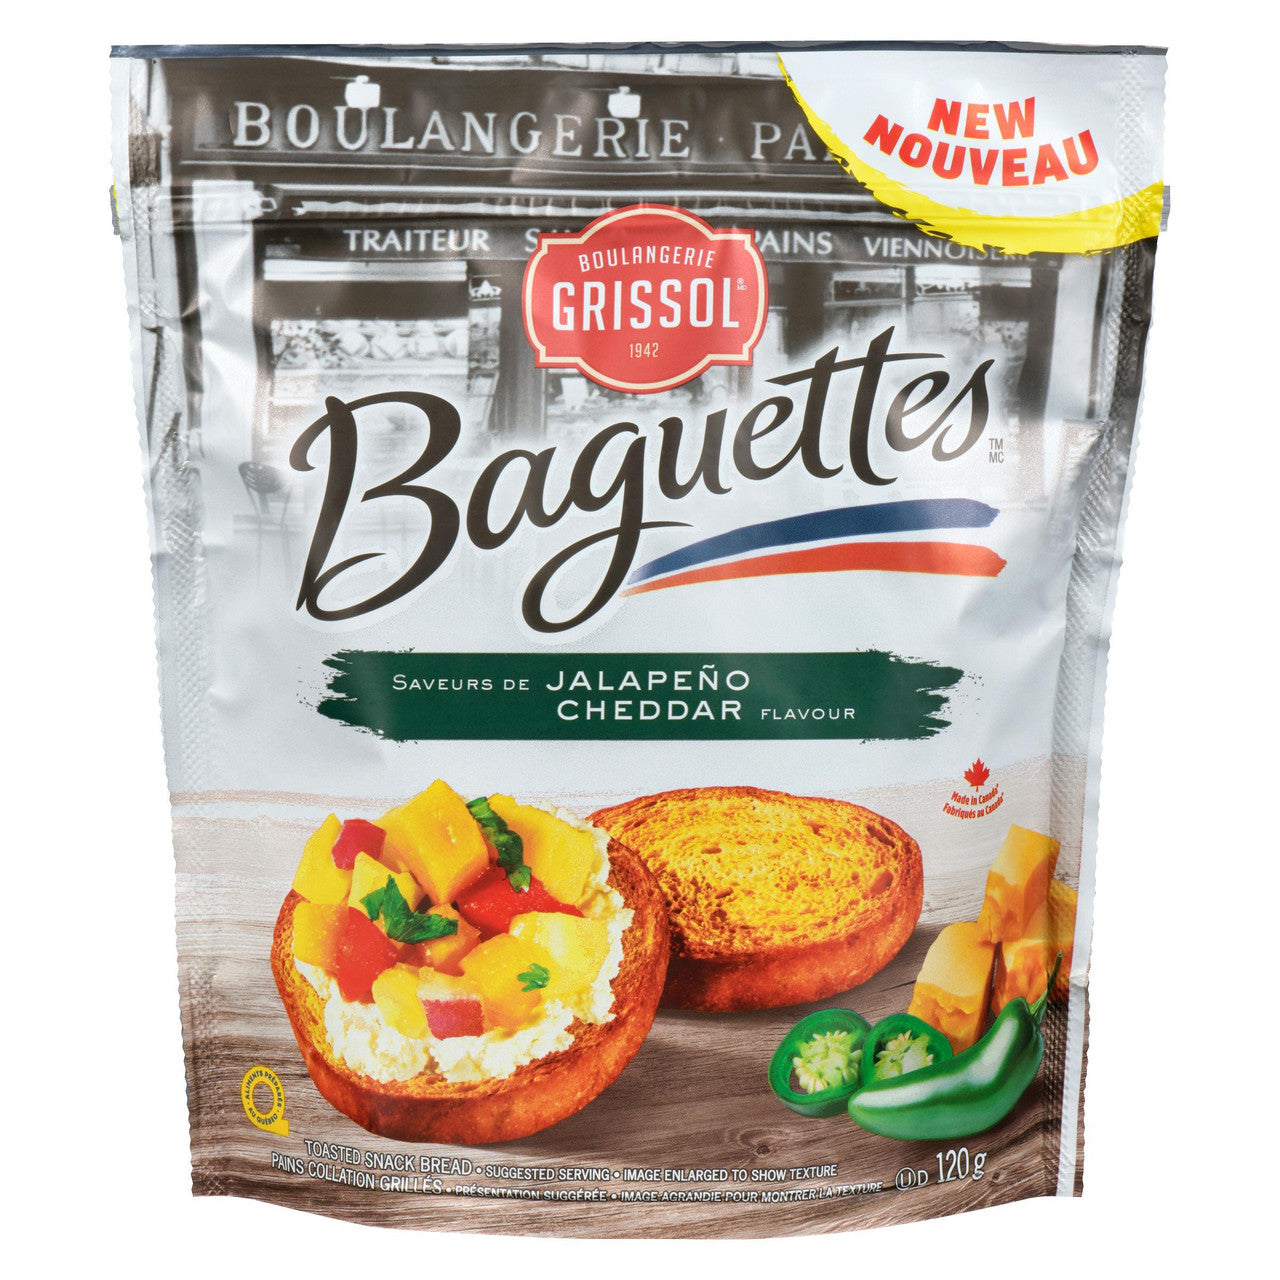 Boulangerie Grissol Baguettes Jalapeno Cheddar Crackers, 120g/4.2 oz. Box  {Imported from Canada}